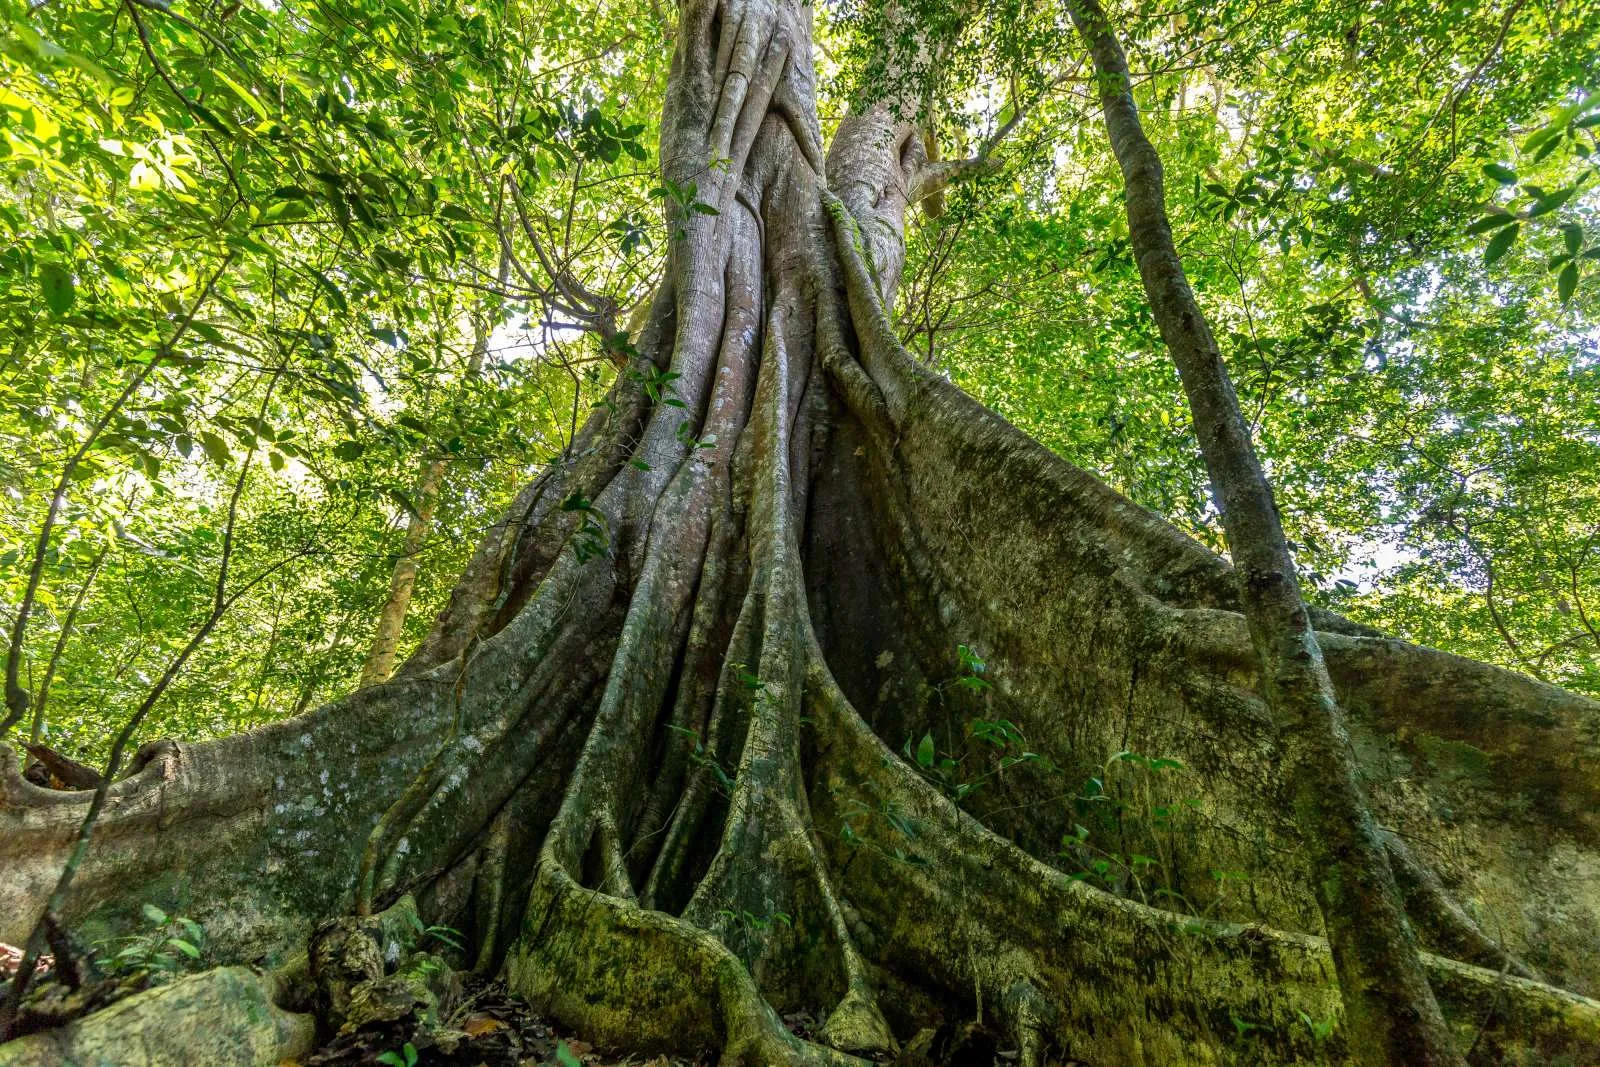 Giant Kapok Tree in Rain Forest in Costa Rica